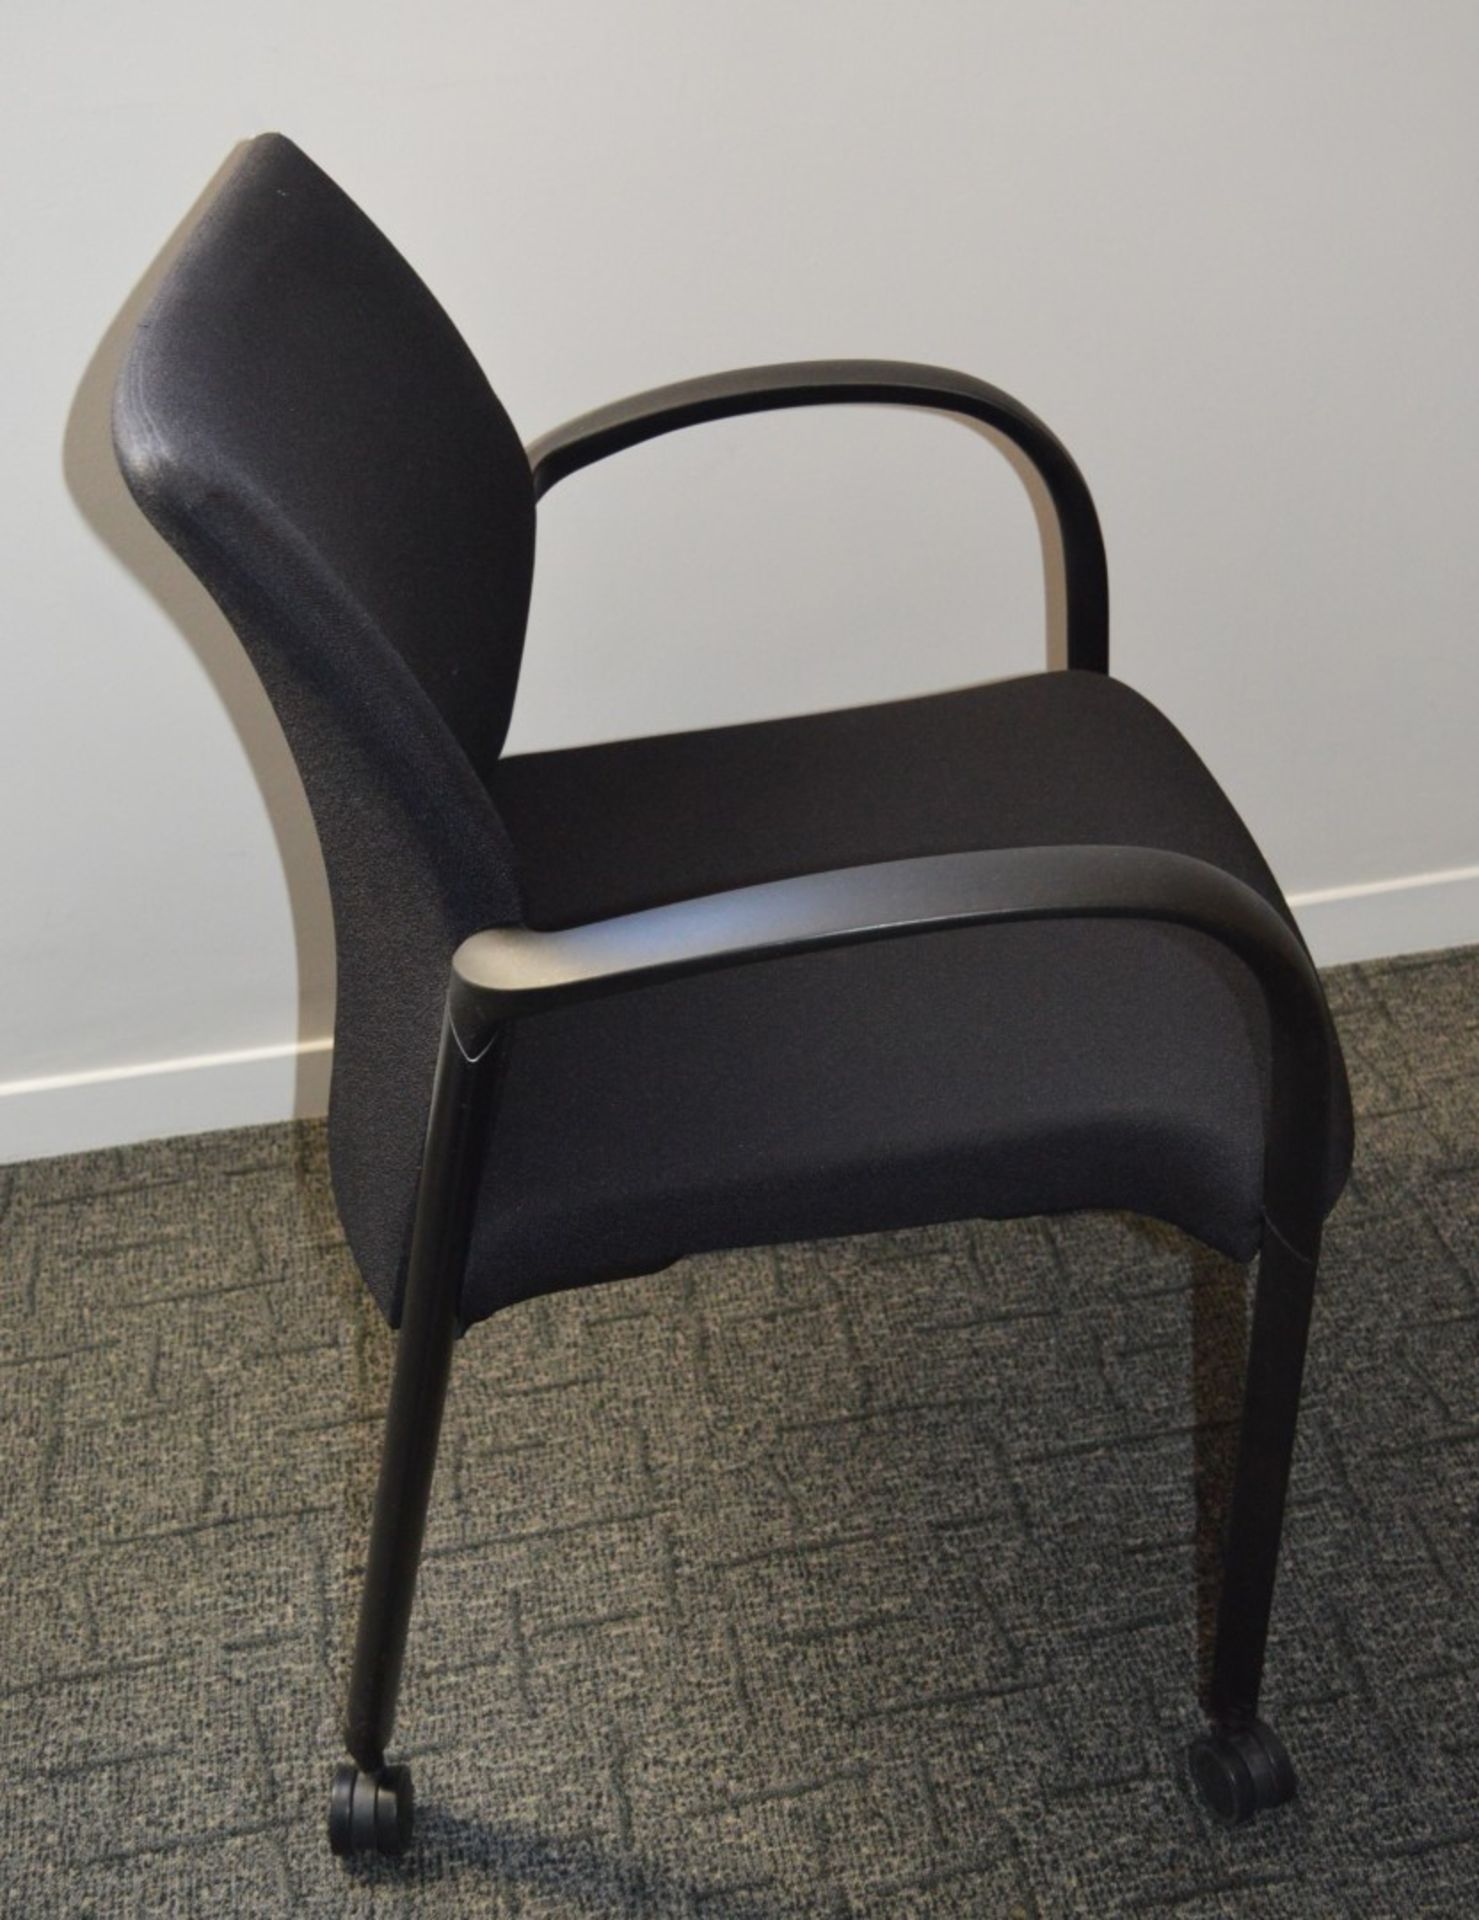 4 x Senator T117A Havana Extreme Office Chairs - Fully Upholstered With Black Frame, Arm Rests and - Image 6 of 6